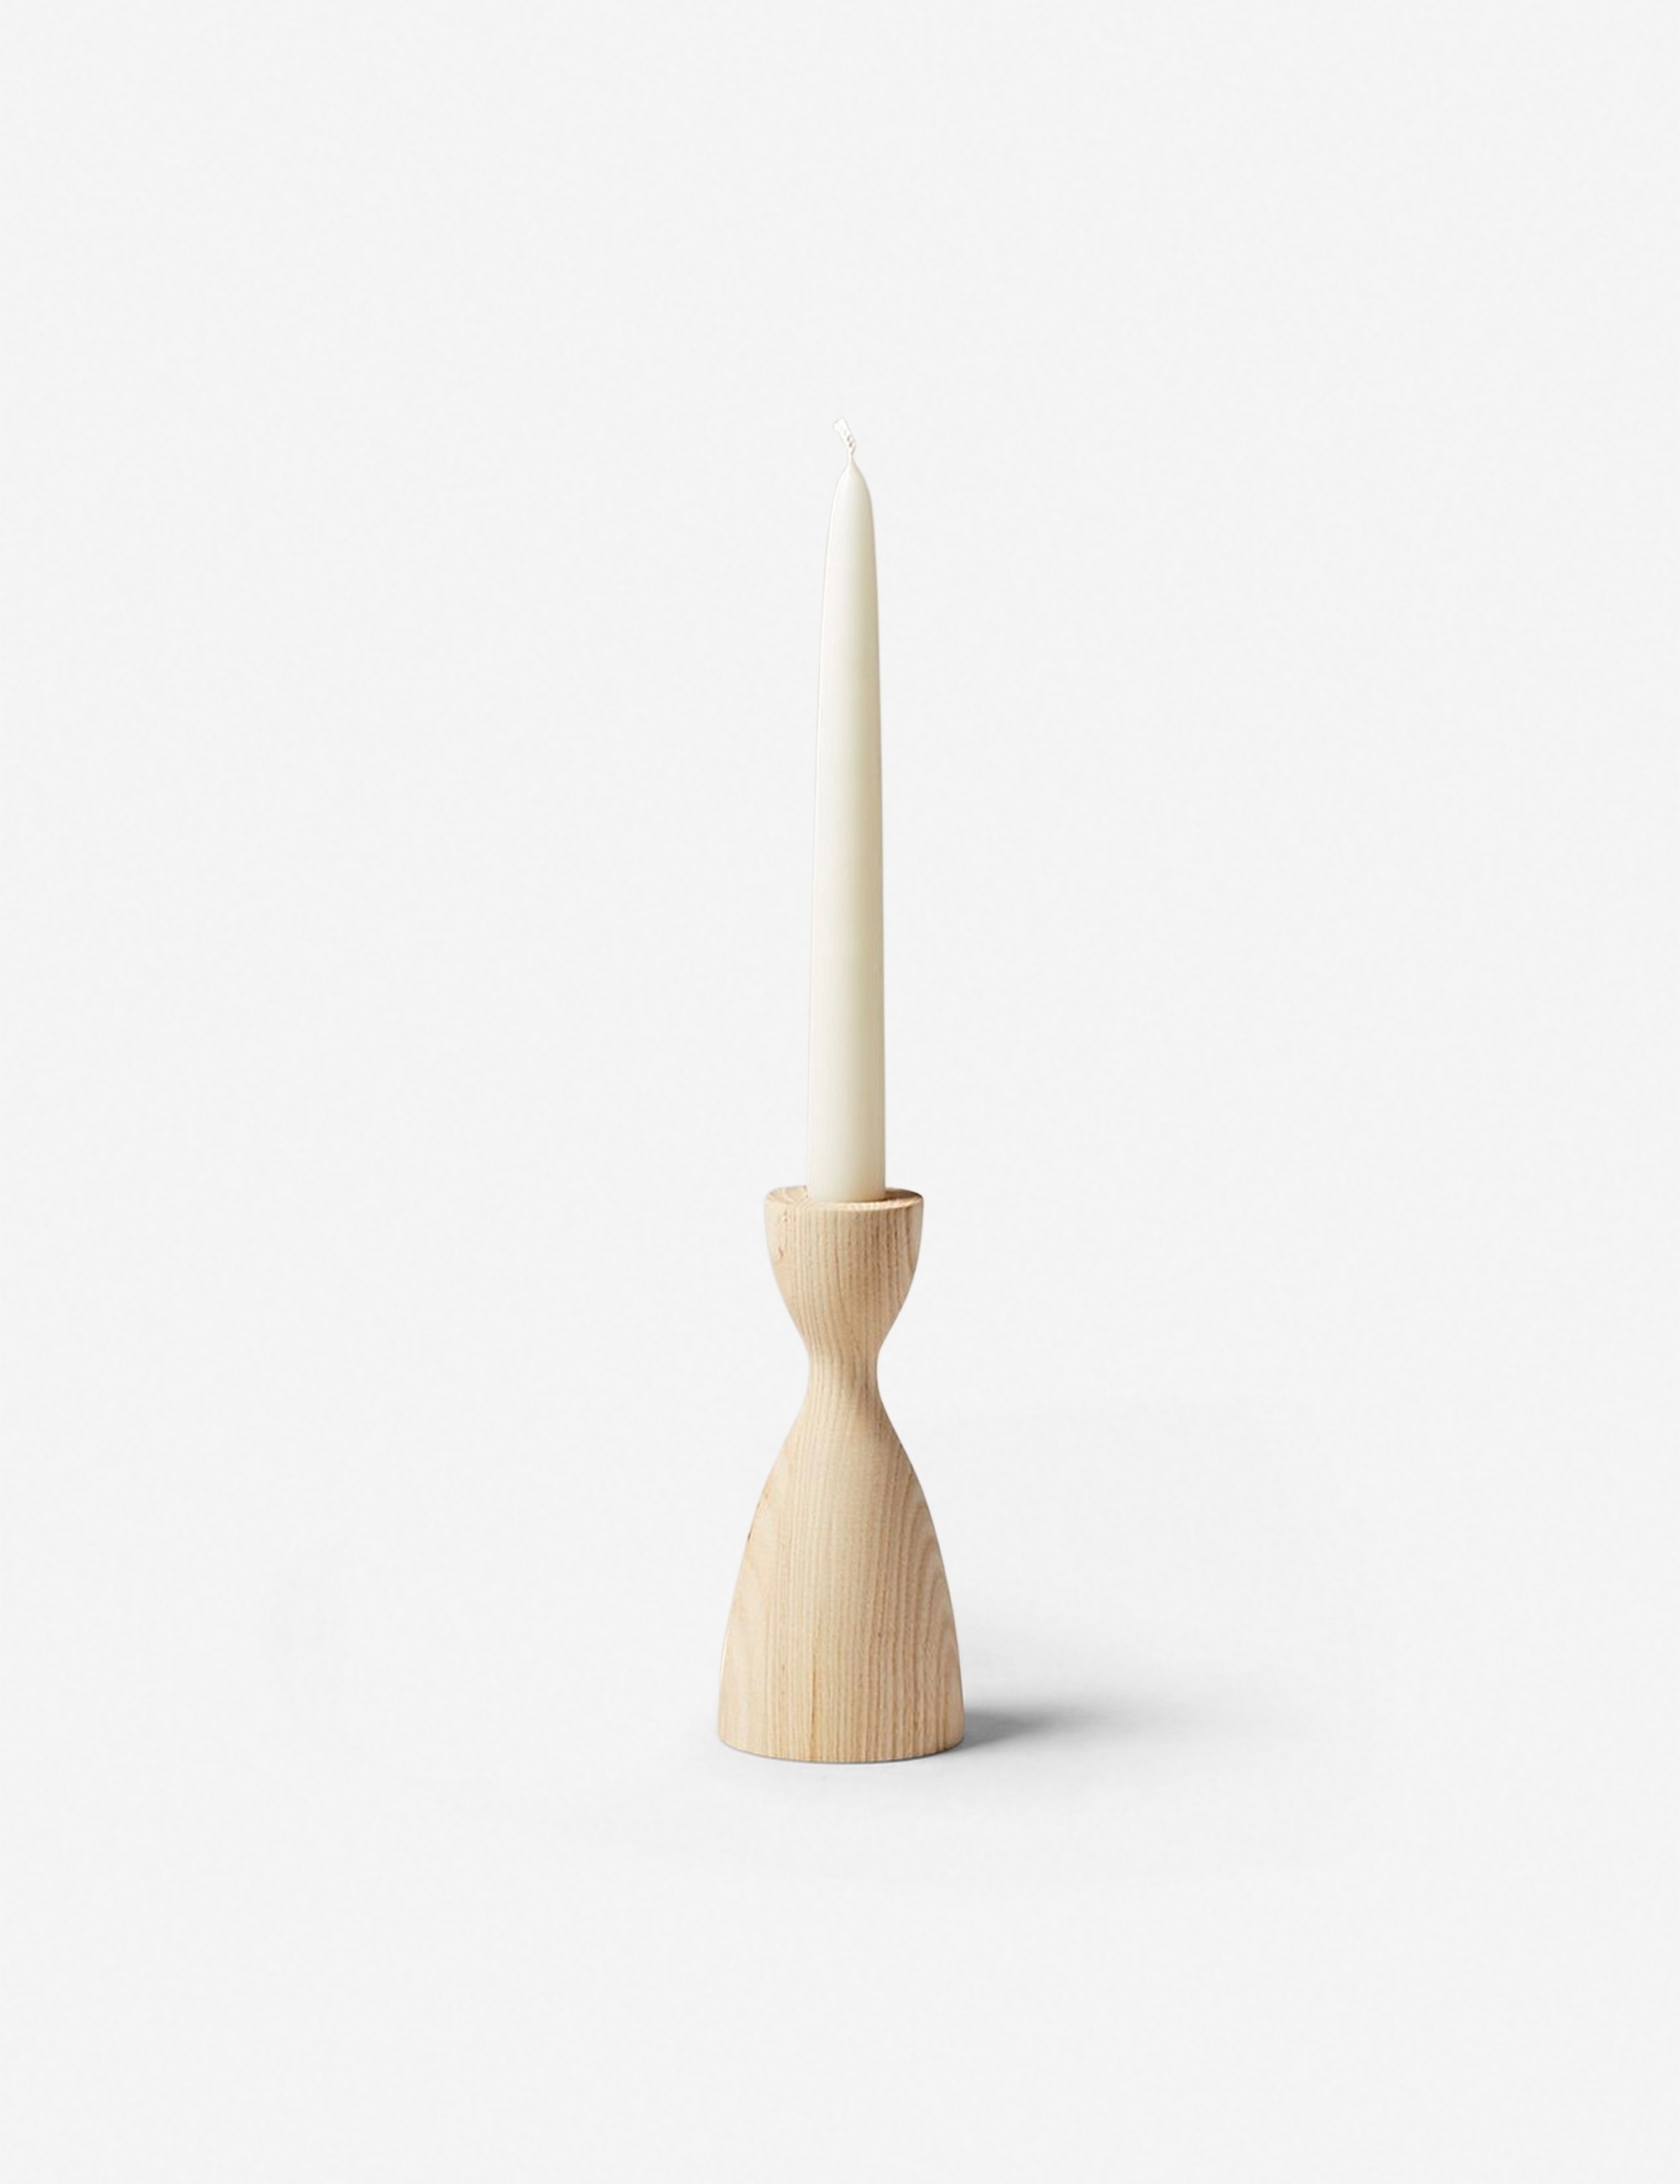 Pantry Candlestick by Farmhouse Pottery - Image 2